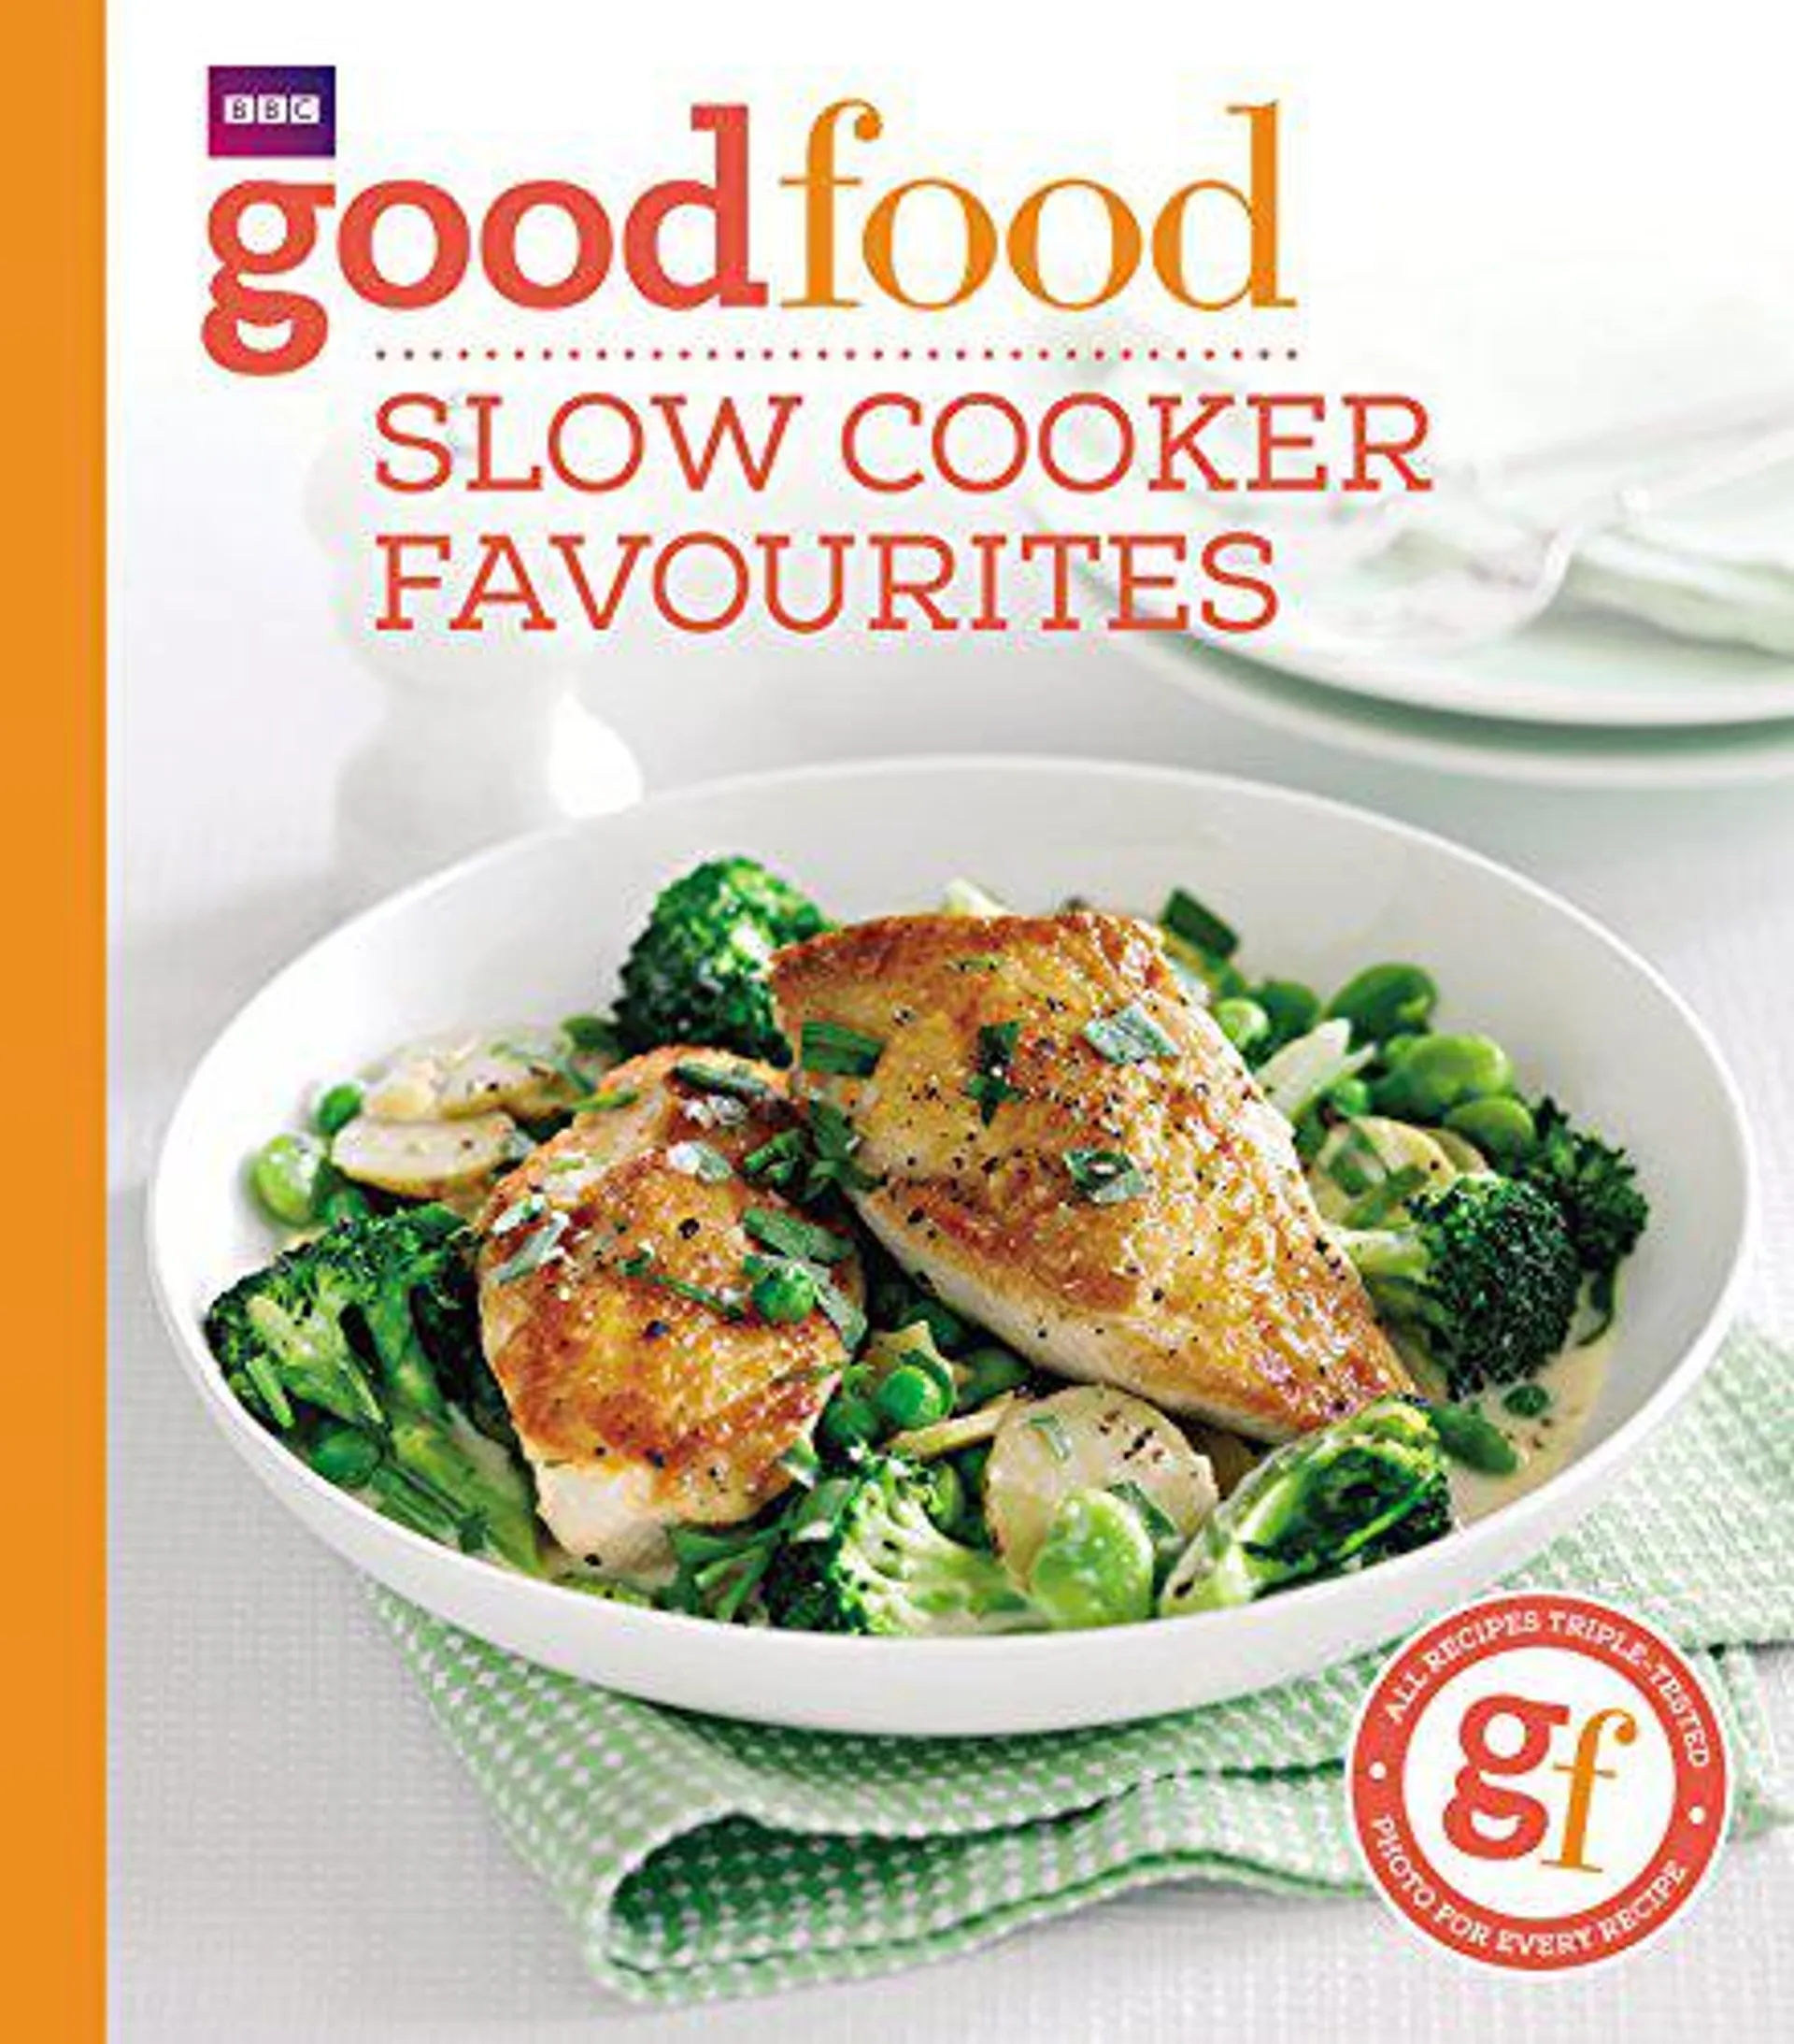 Good Food: Slow cooker favourites by Good Food Guides